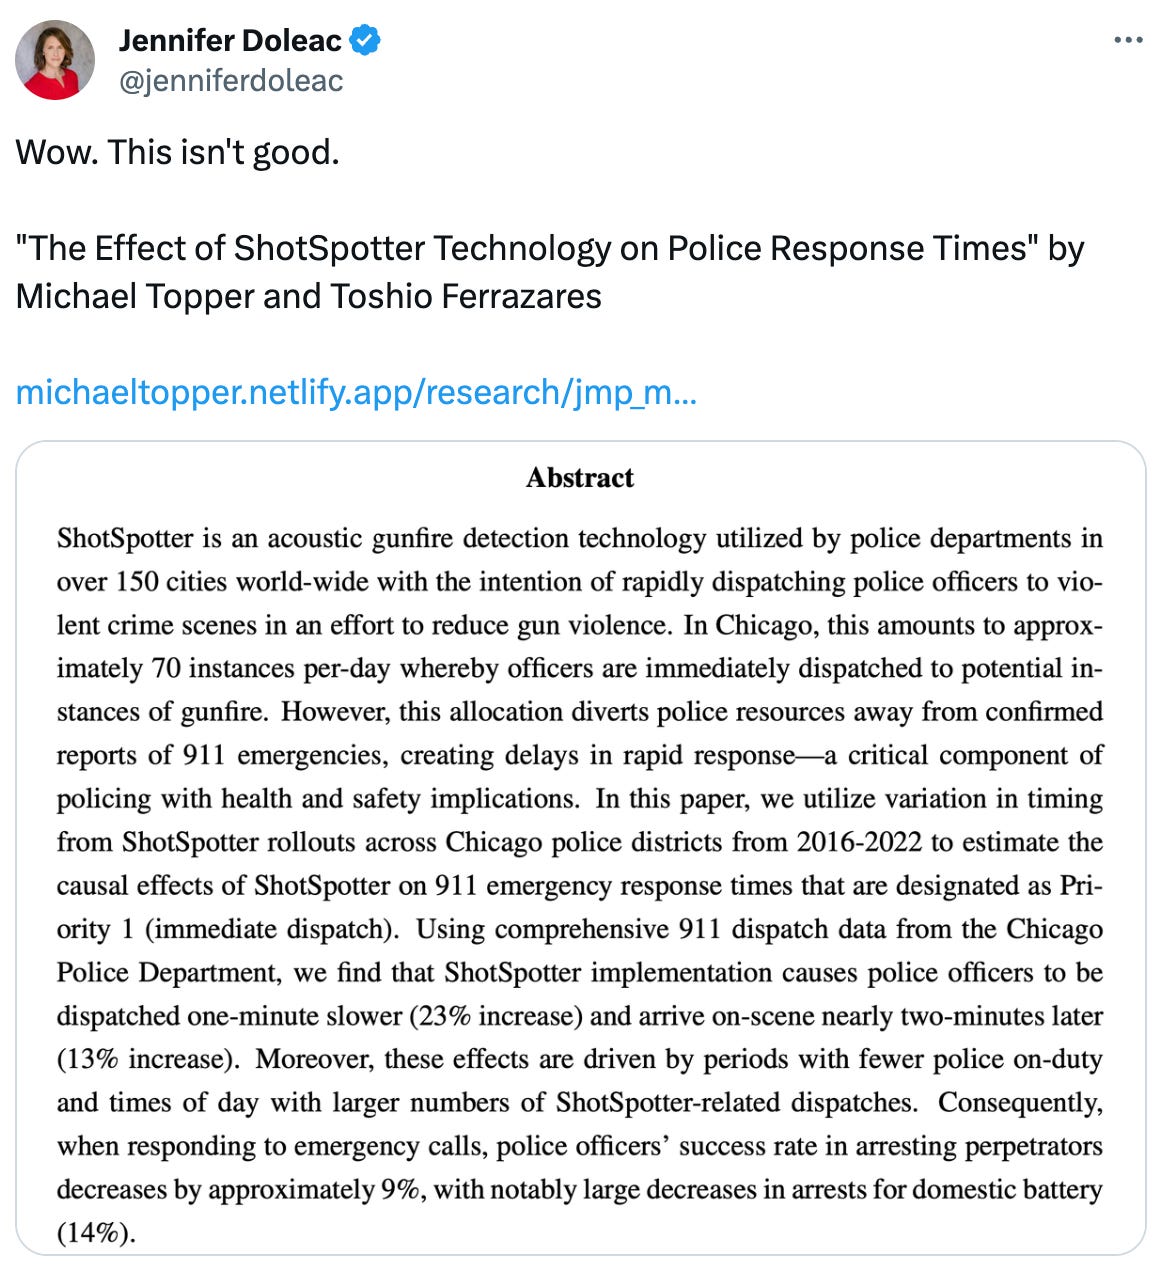  Jennifer Doleac @jenniferdoleac Wow. This isn't good.   "The Effect of ShotSpotter Technology on Police Response Times" by Michael Topper and Toshio Ferrazares  https://michaeltopper.netlify.app/research/jmp_michael_topper.pdf